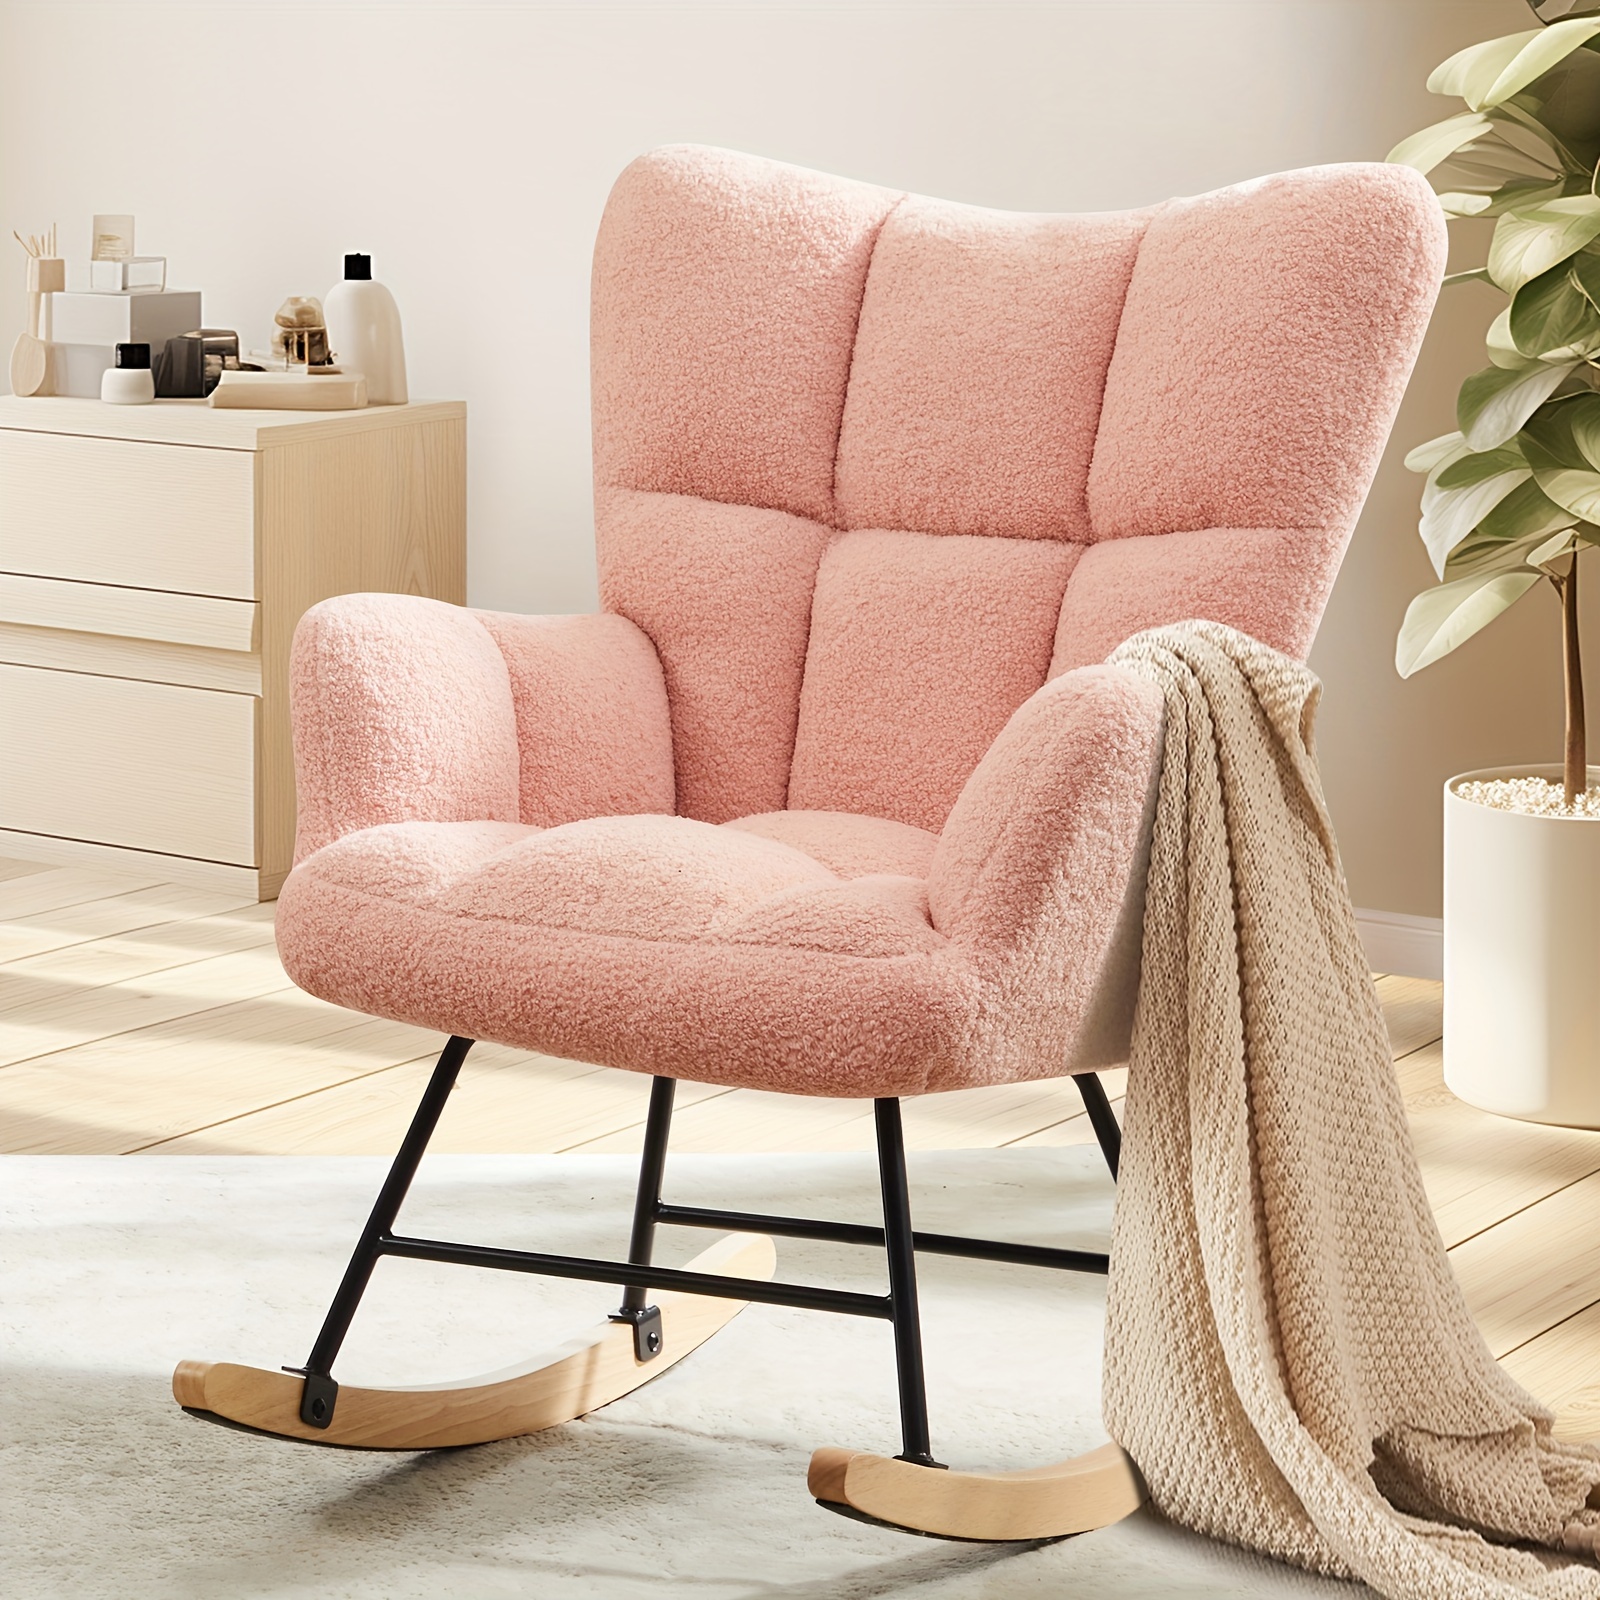 

Rocking Chair For Nursery, Teddy Upholstered Glider With High Backrest, Padded Seat, Modern Accent Recliner, Comfy Cushion Reading Rocker Armchair, Living Room, Bedroom Furniture